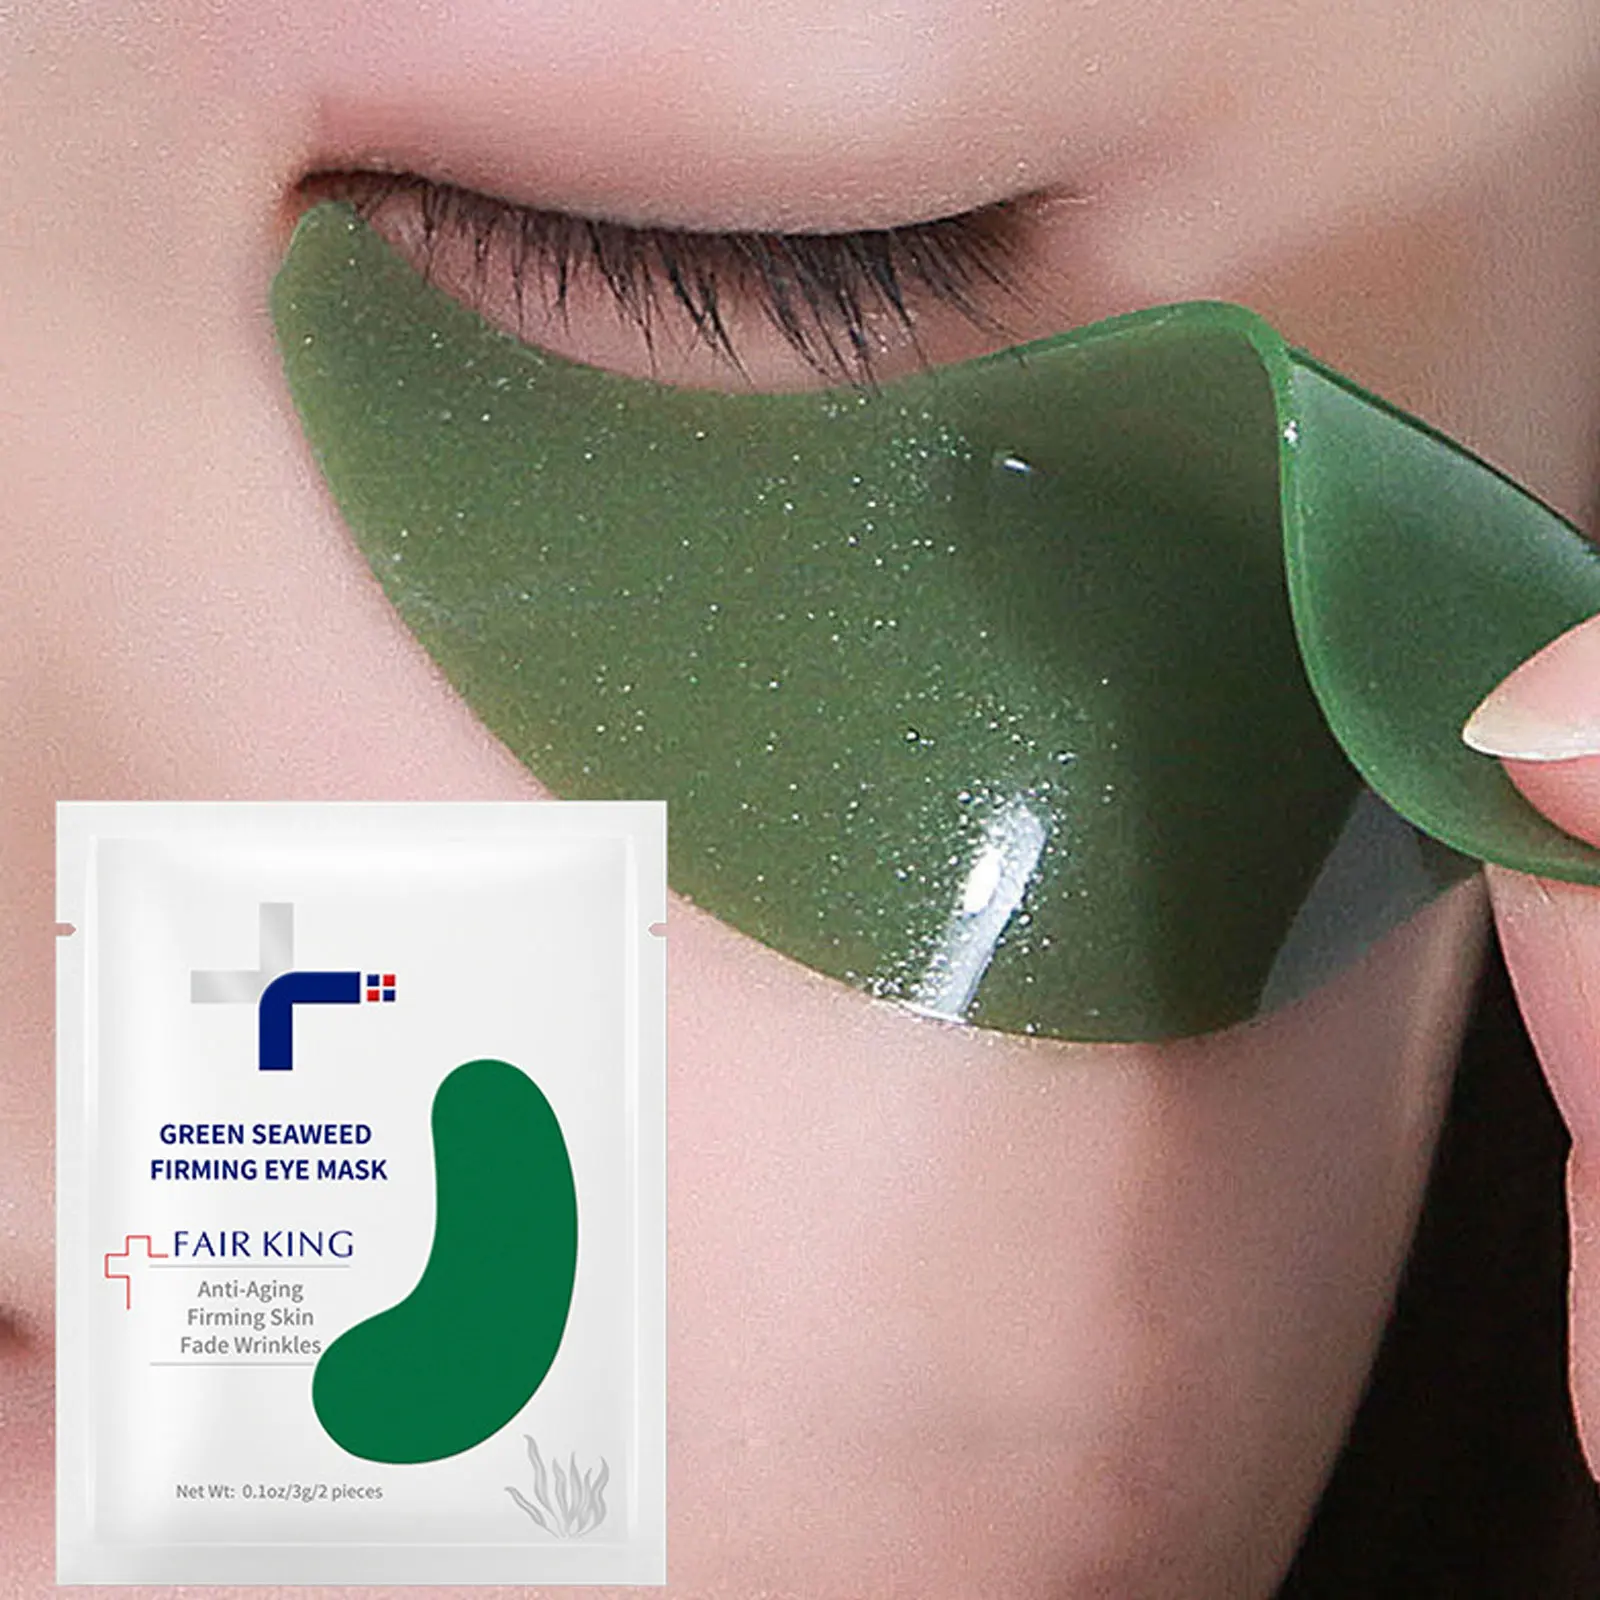 

Seaweed Firming Eye Mask Eye Patches For The Eyes Crystal Green Masks Anti Aging Dark Circle Puffiness Collagen Eyelid Patch New